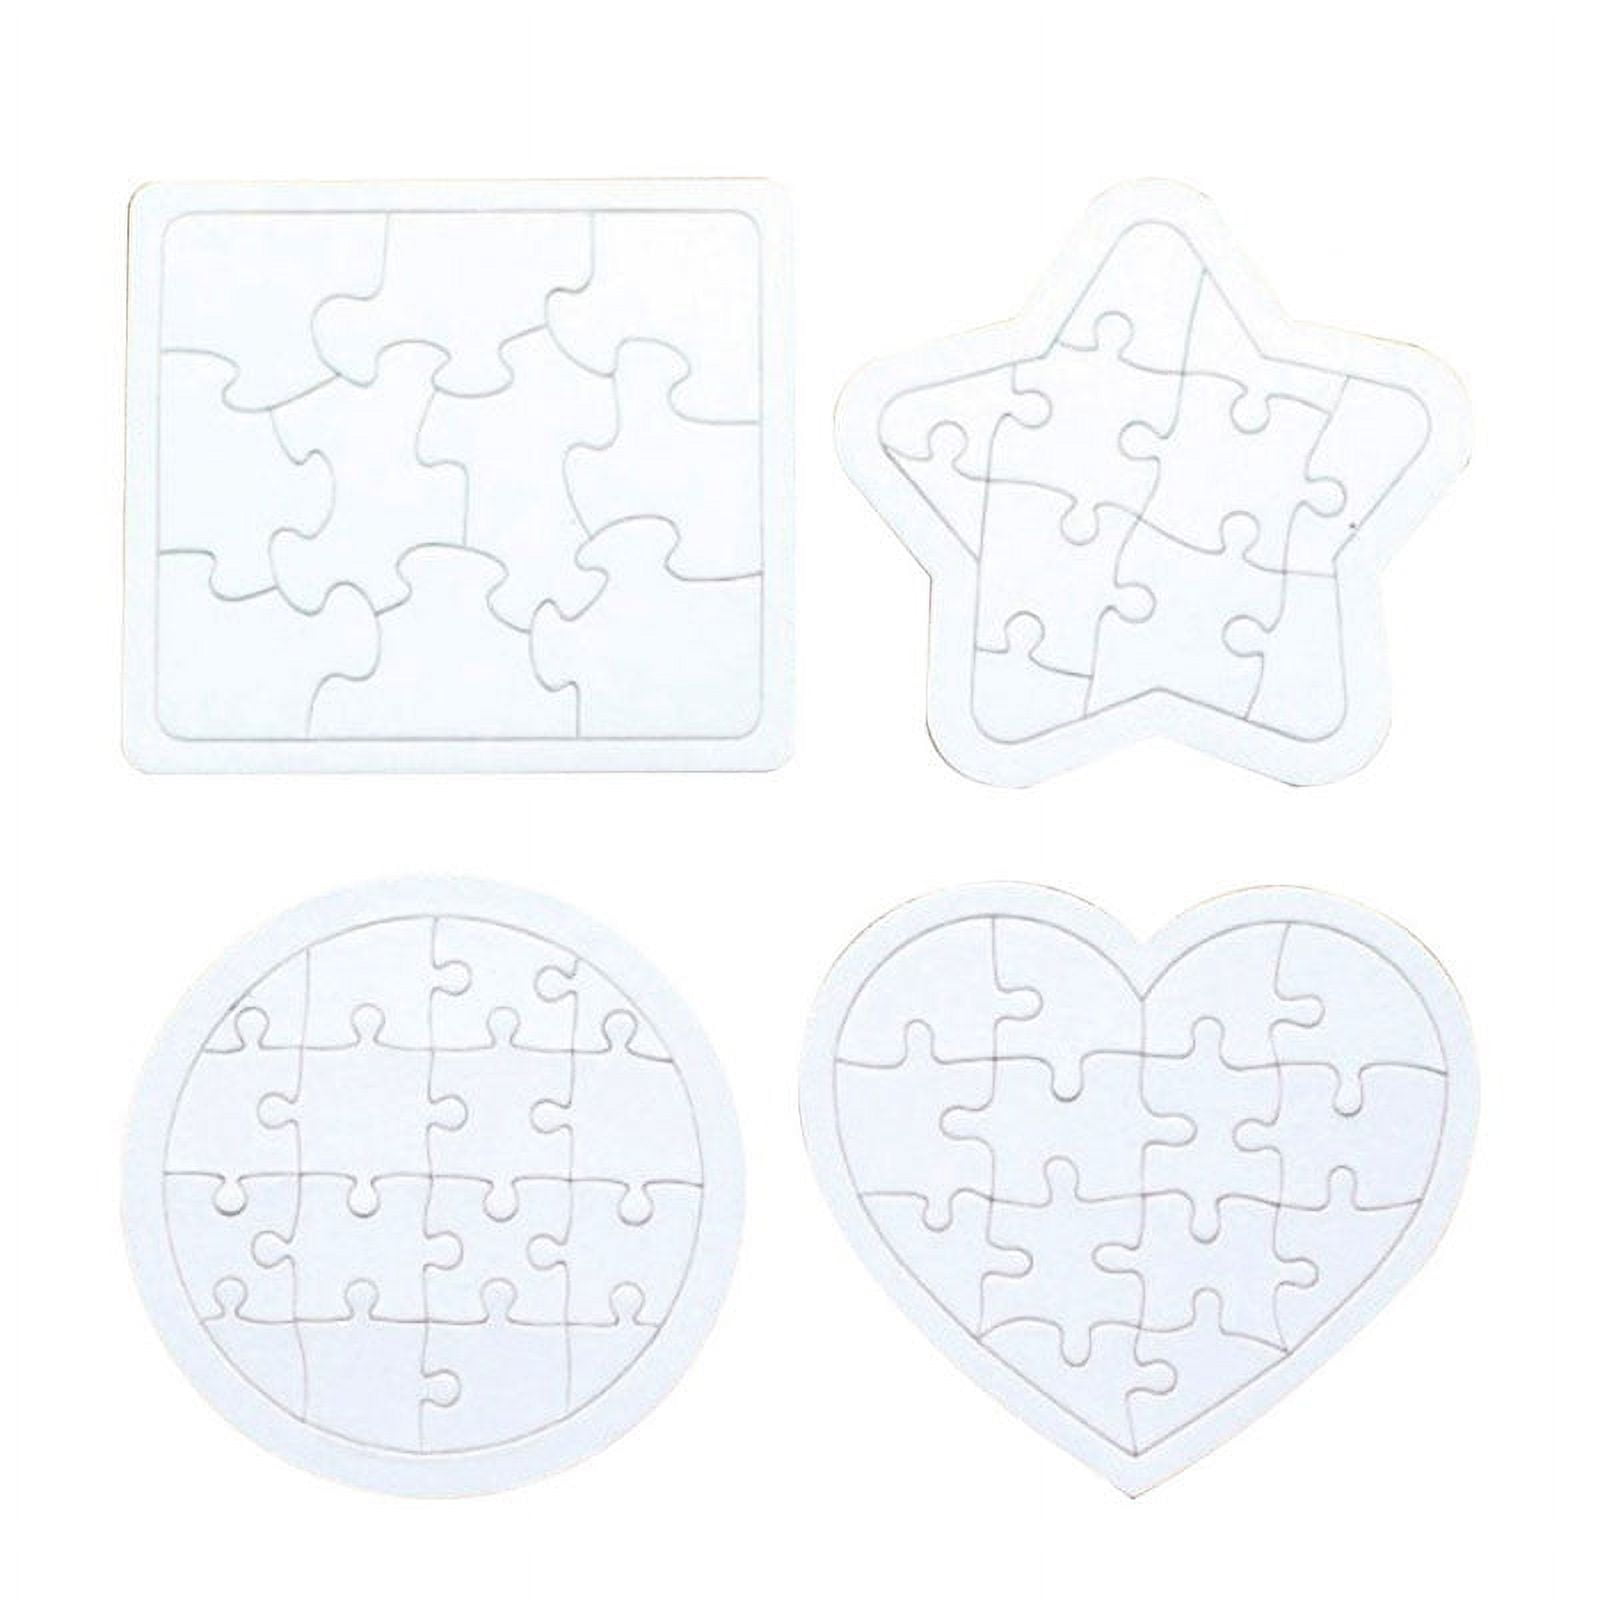 48 Pack Blank Puzzles to Draw On Bulk – Make Your Own 6x8 Inch Jigsaw Puzzle  for DIY Arts and Crafts Projects (28 Pieces Each)